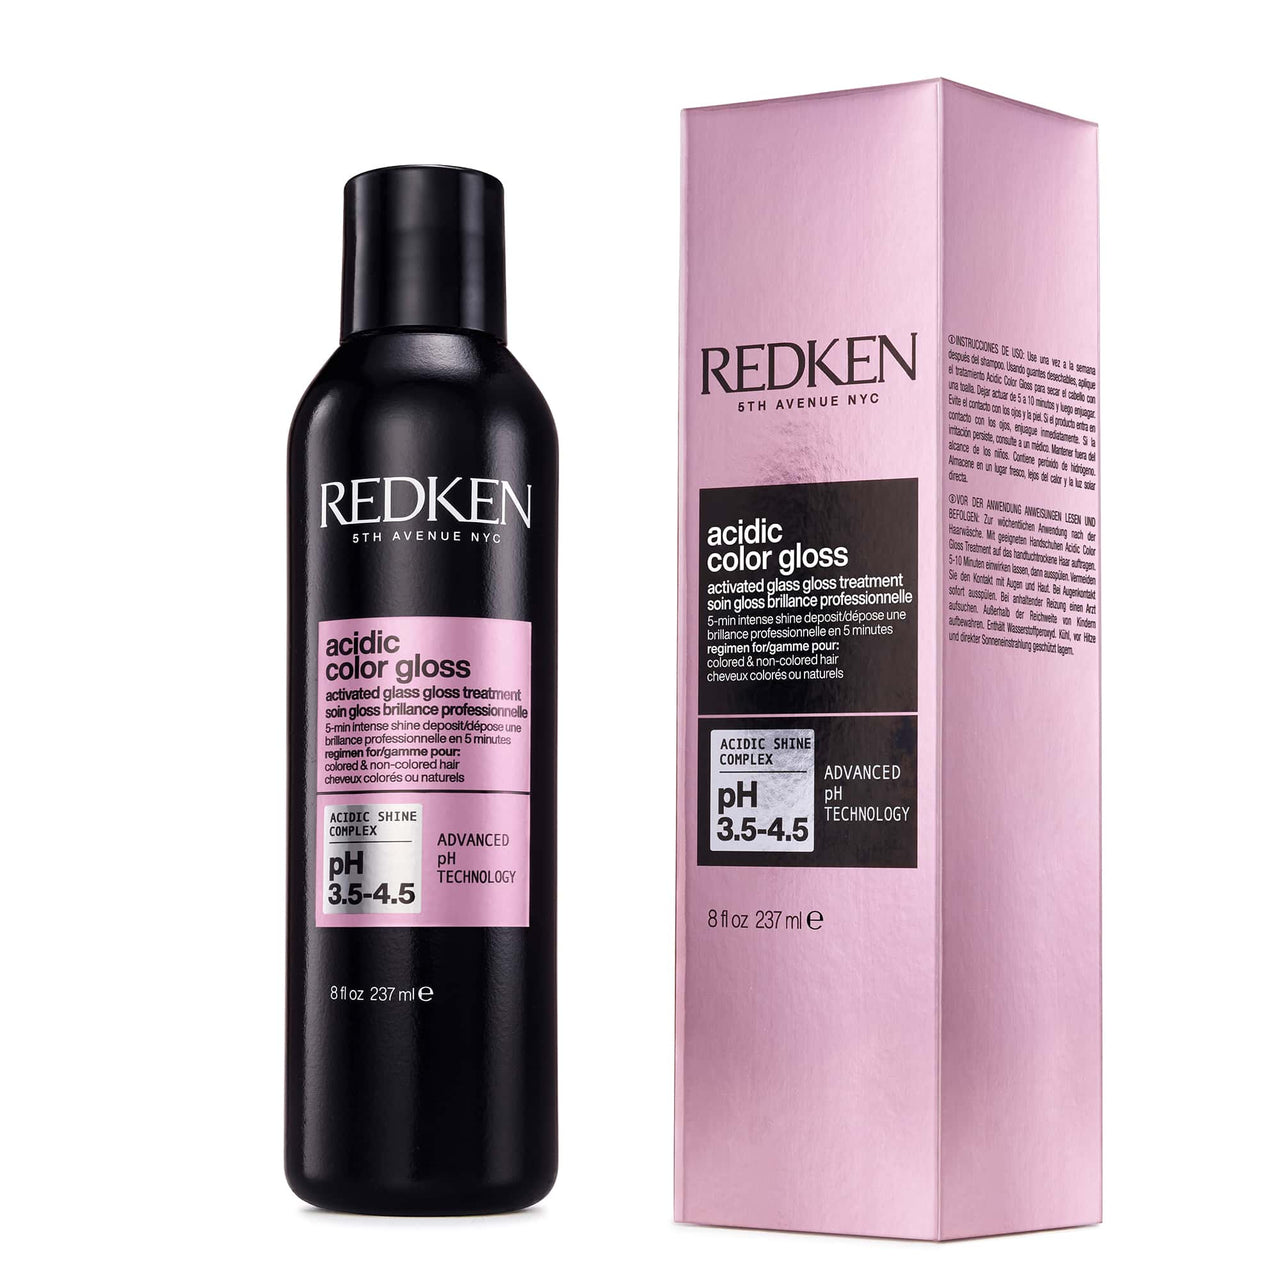 REDKEN_Acidic Color Gloss Activated Glass Gloss Treatment_Cosmetic World